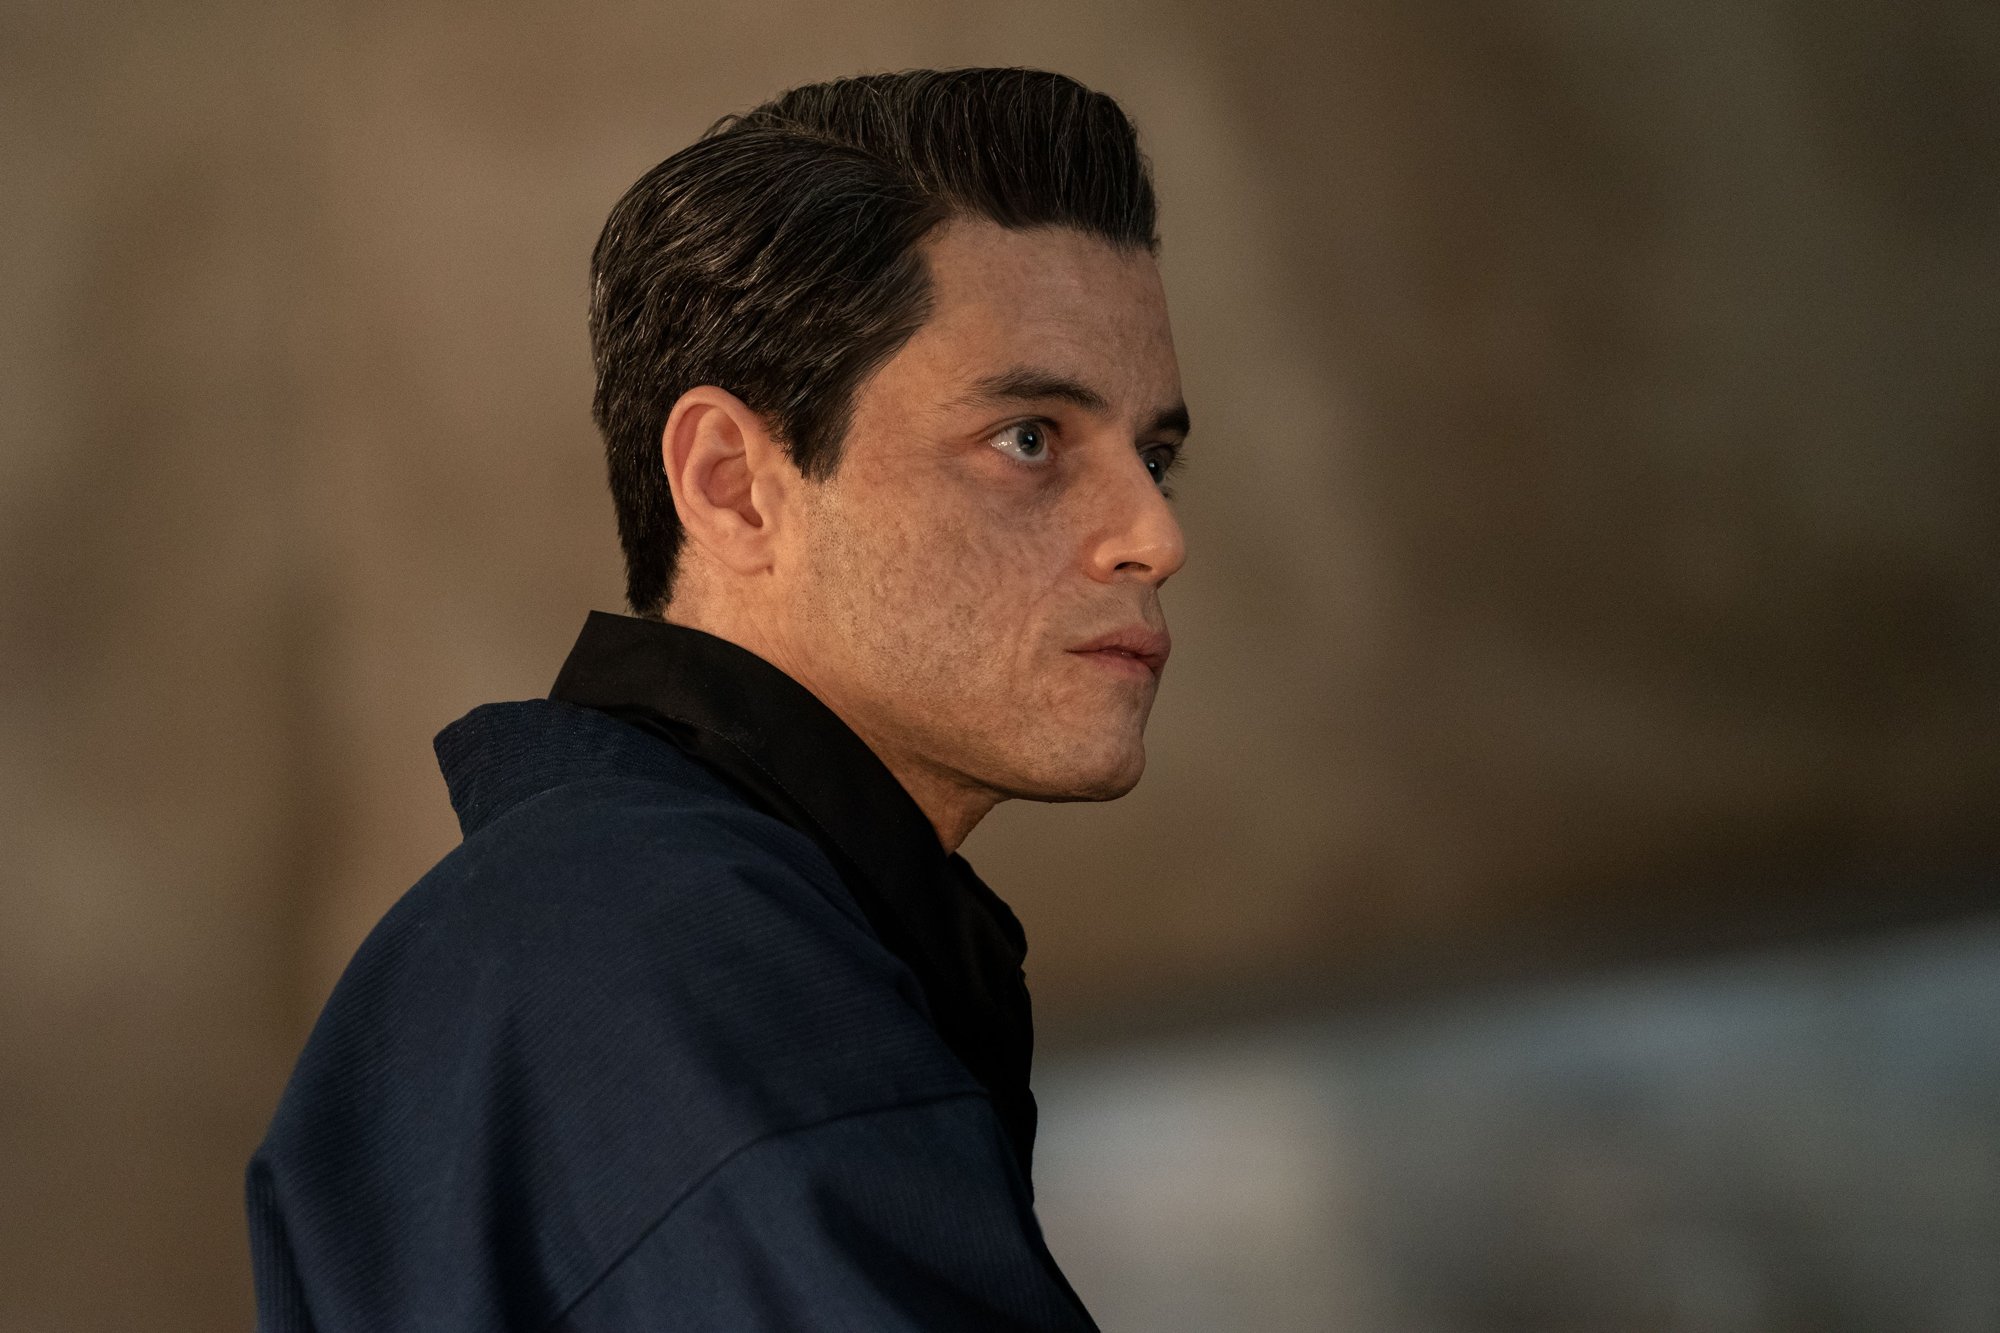 Rami Malek stars as Safin in Universal Pictures' No Time to Die (2020)